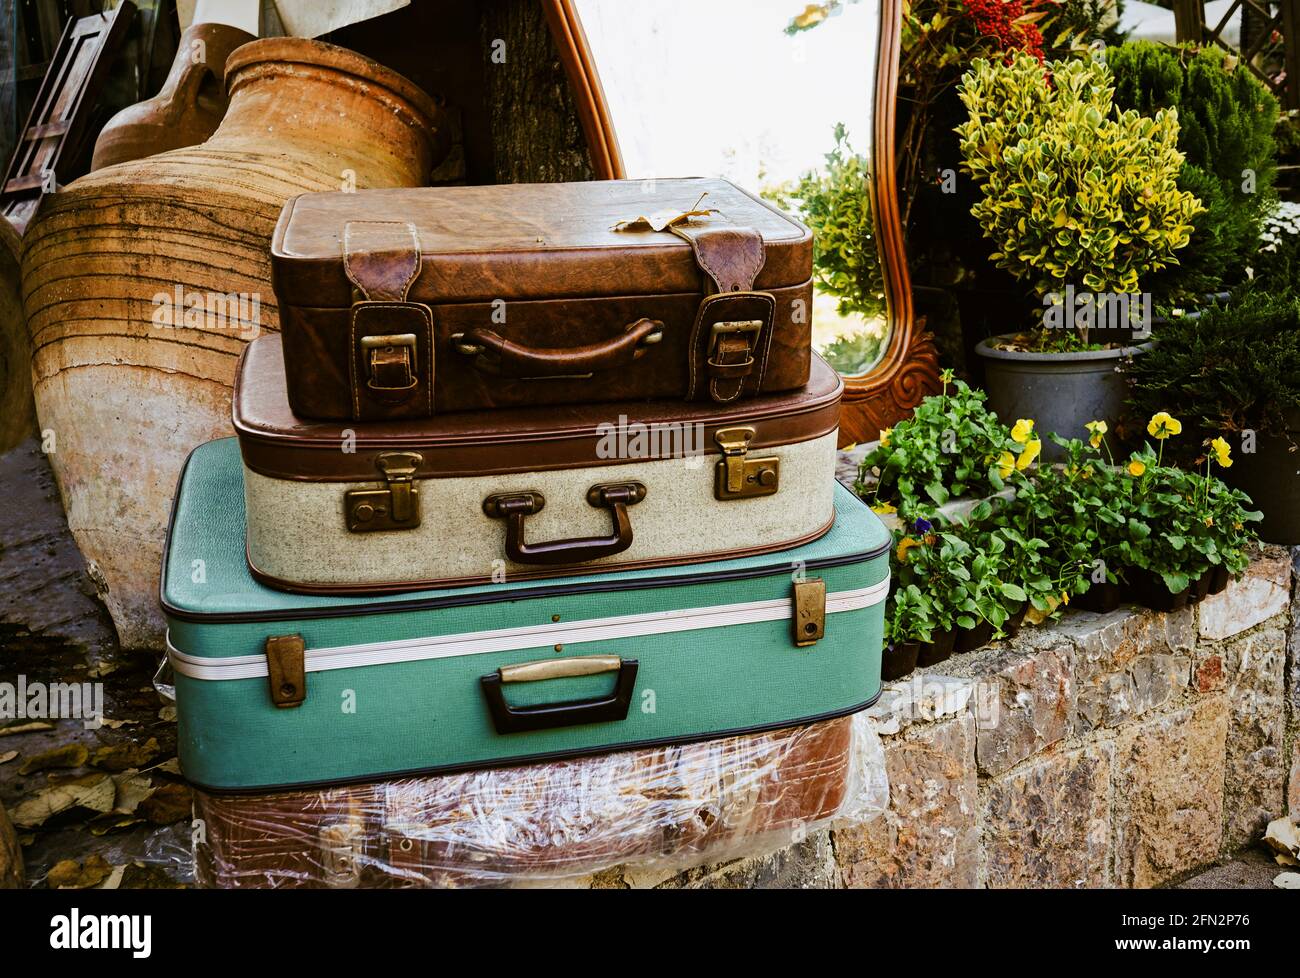 Some old suitcases left at street. Vintage suitcases. Stock Photo